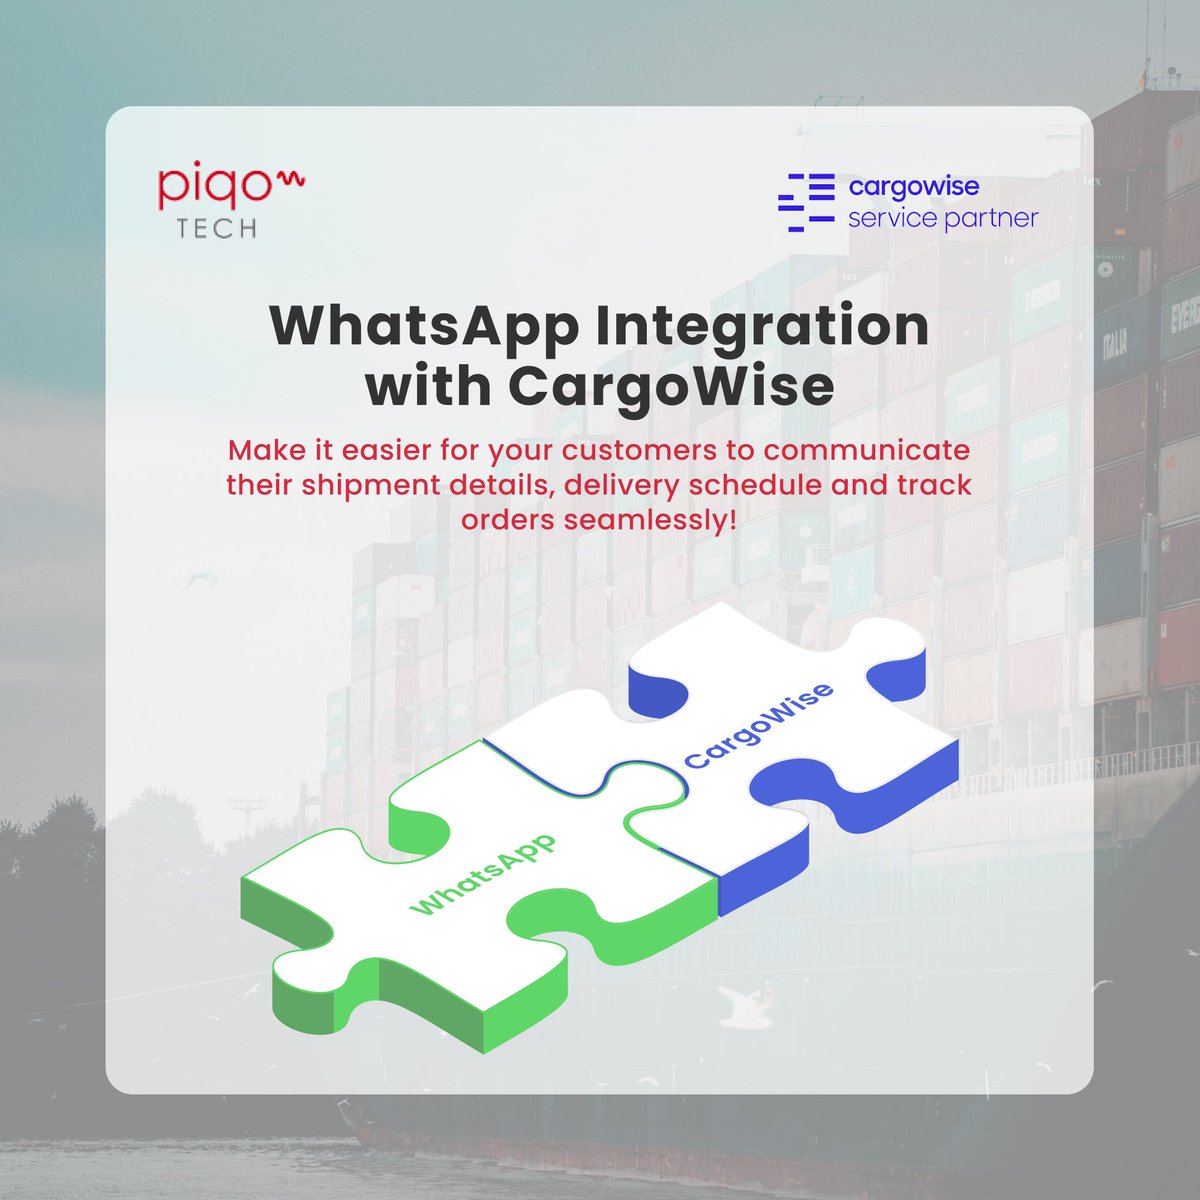 Introducing WhatsApp Integration with CargoWise by PiqoTech! Make it easier for your customers to communicate their shipment details and delivery schedule and track orders seamlessly.

#freightforwarders #freightforwarding #logistics #liner #supplychain #3pl #cargowise